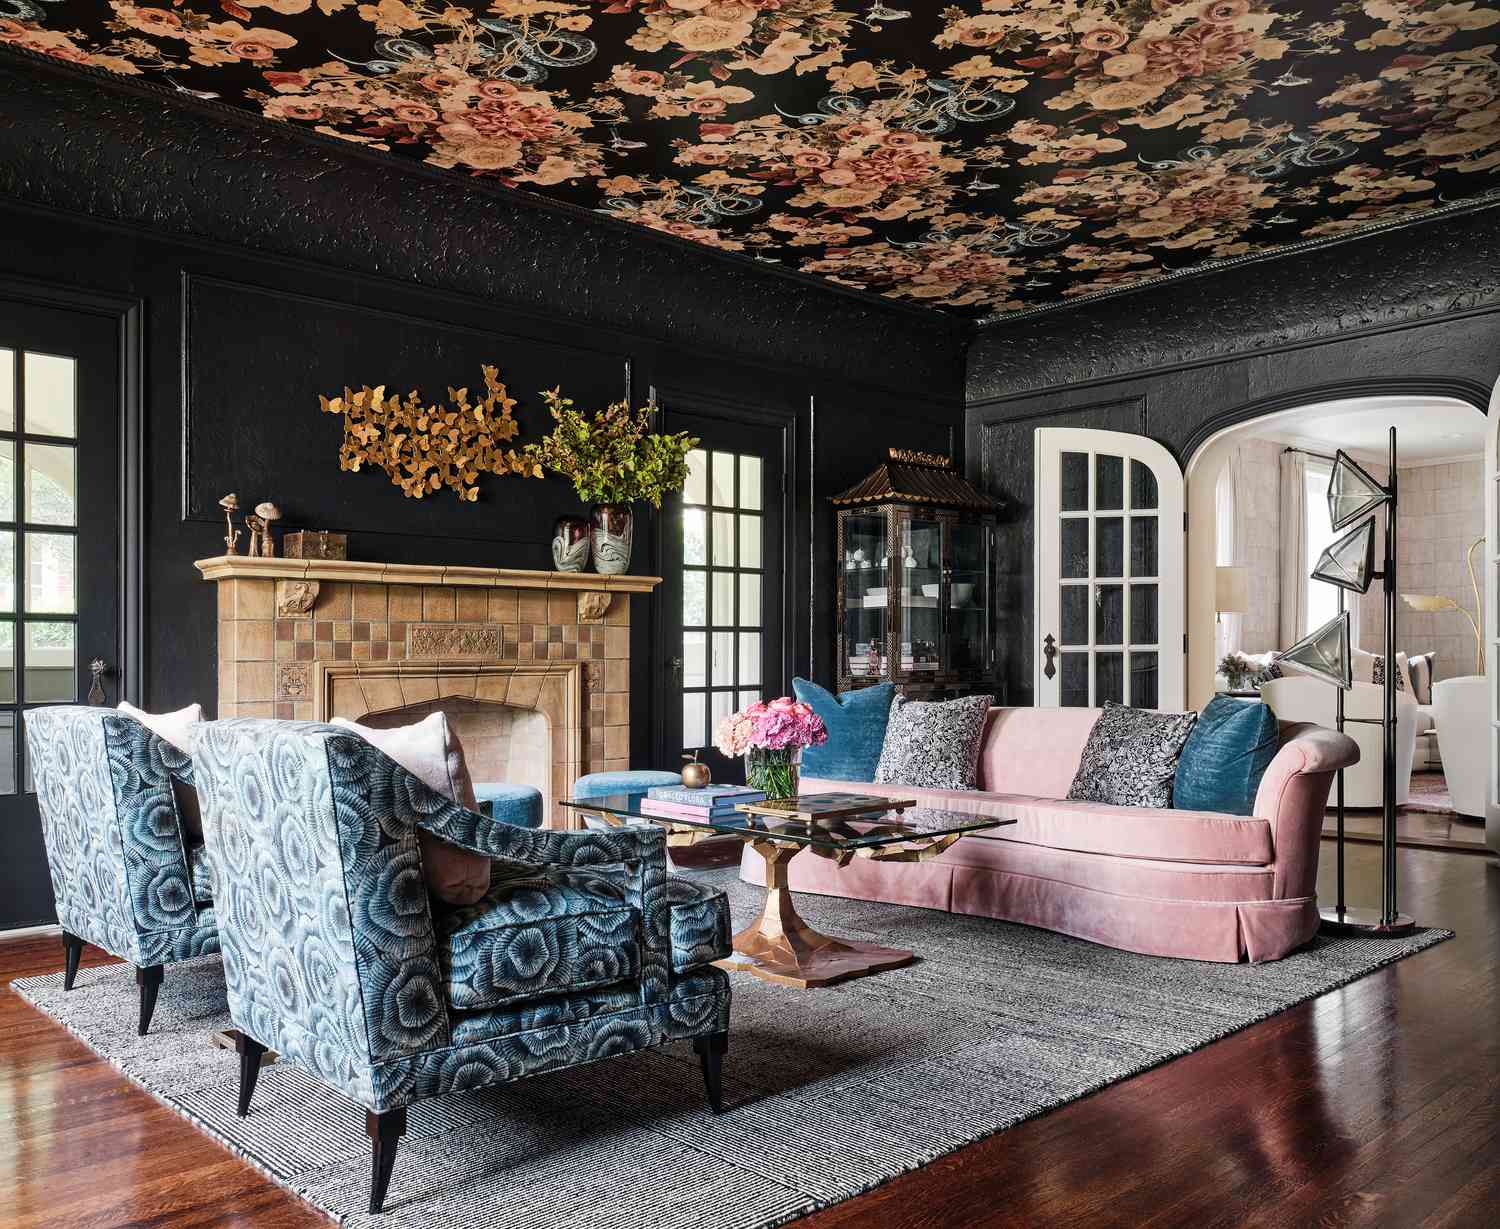 bold wallpapered ceiling